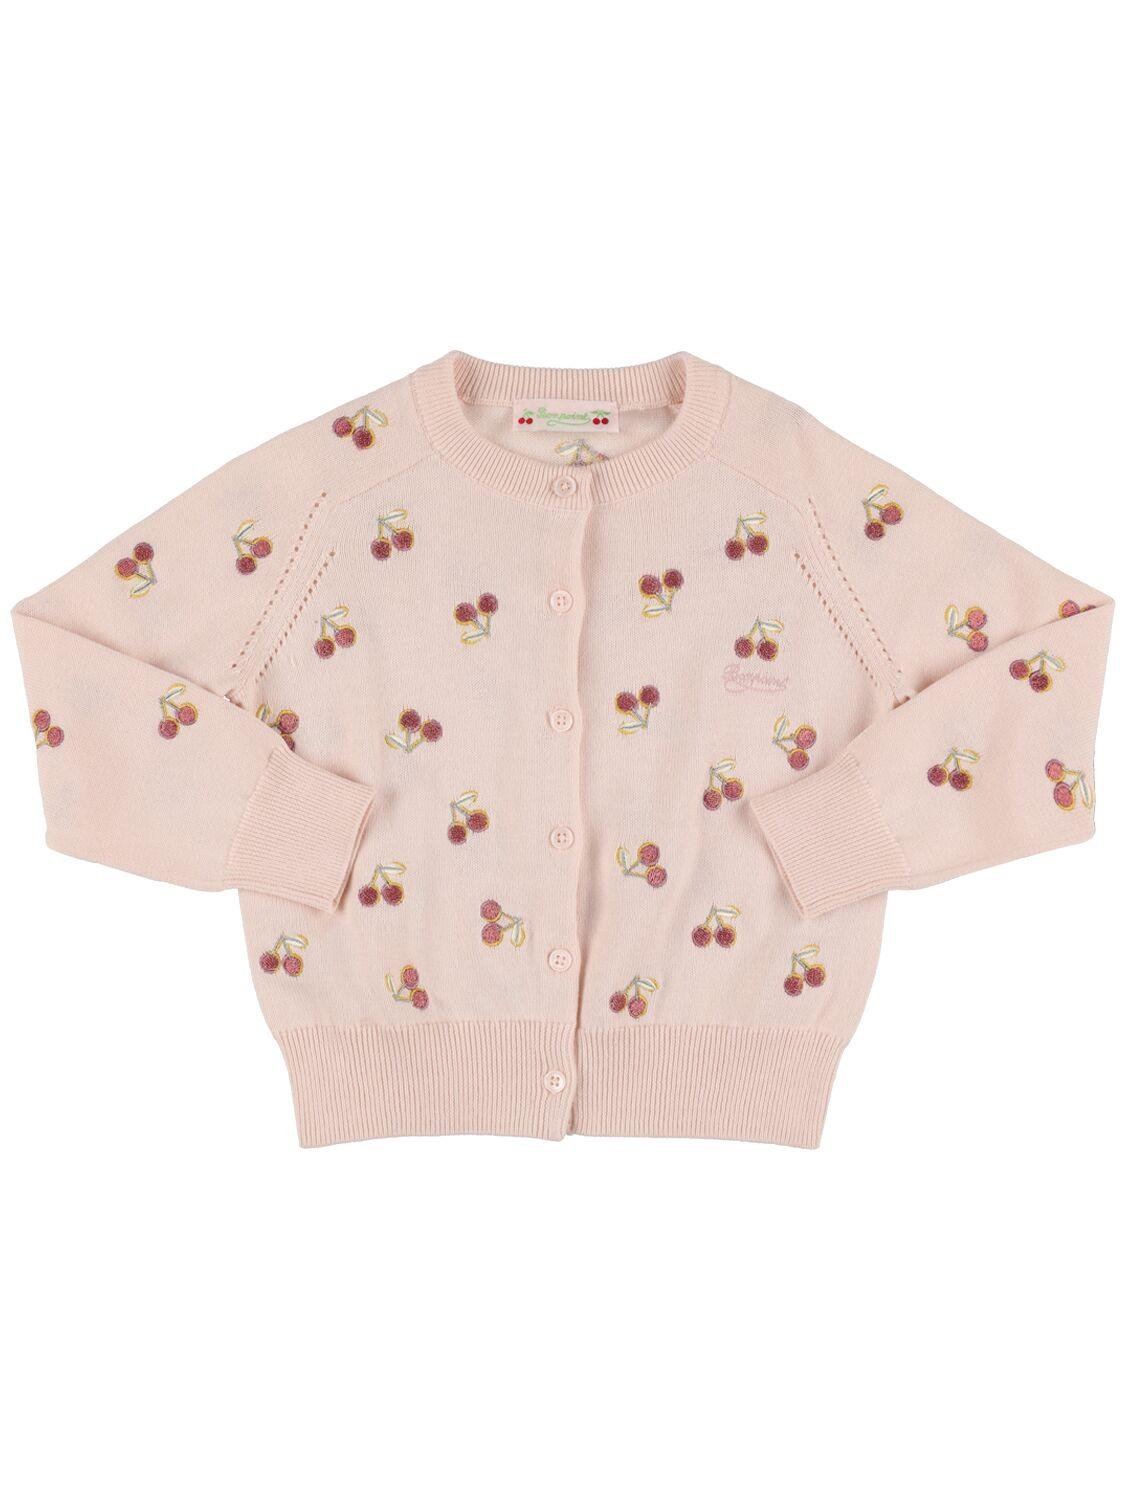 Cherry Embroidered Cotton Knit Cardigan by BONPOINT